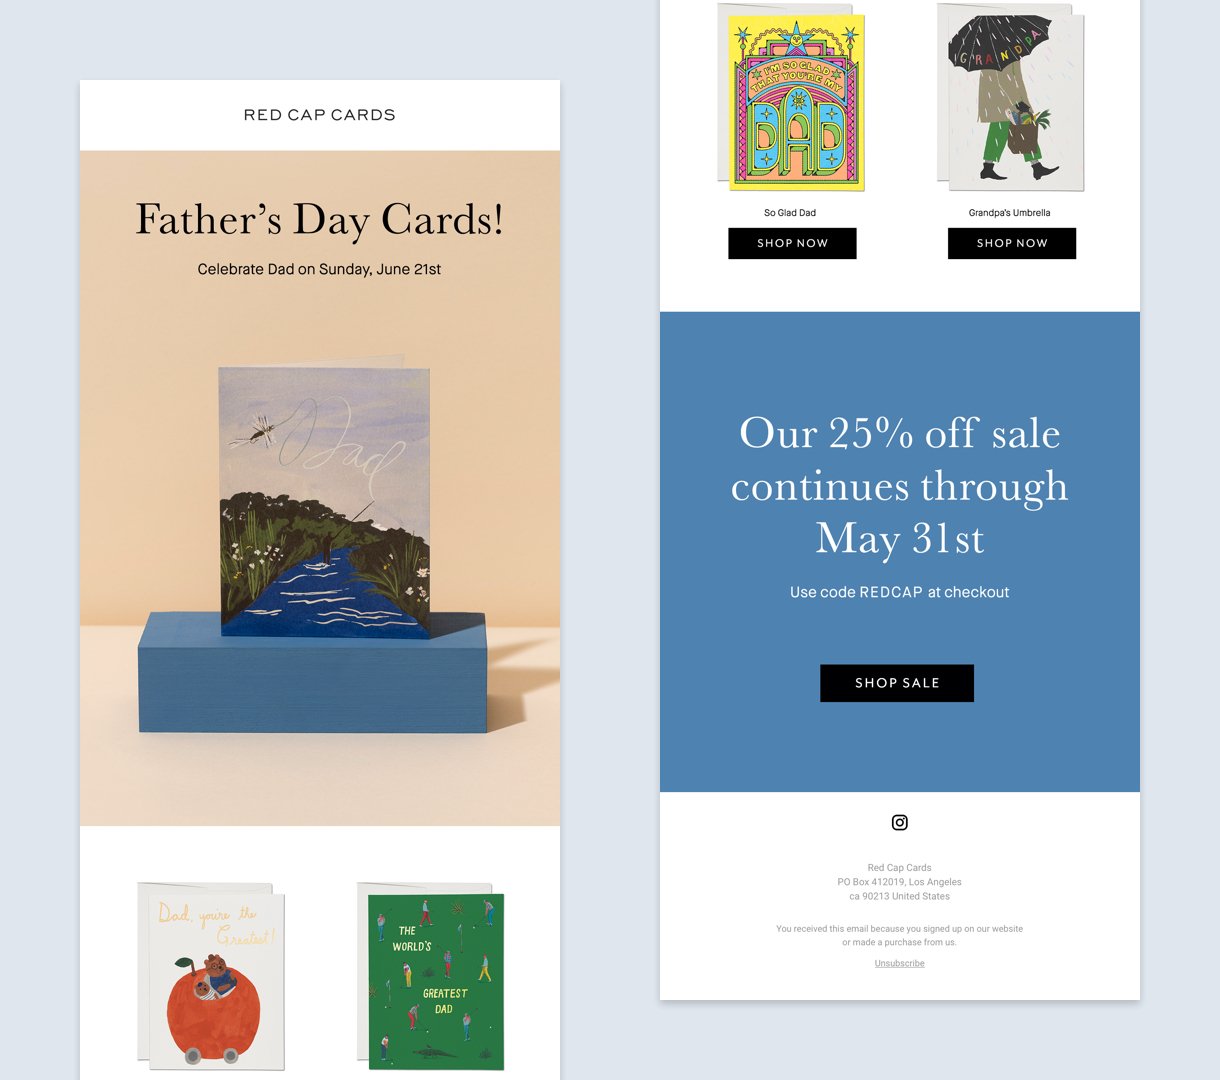 Red Cap Cards email design example